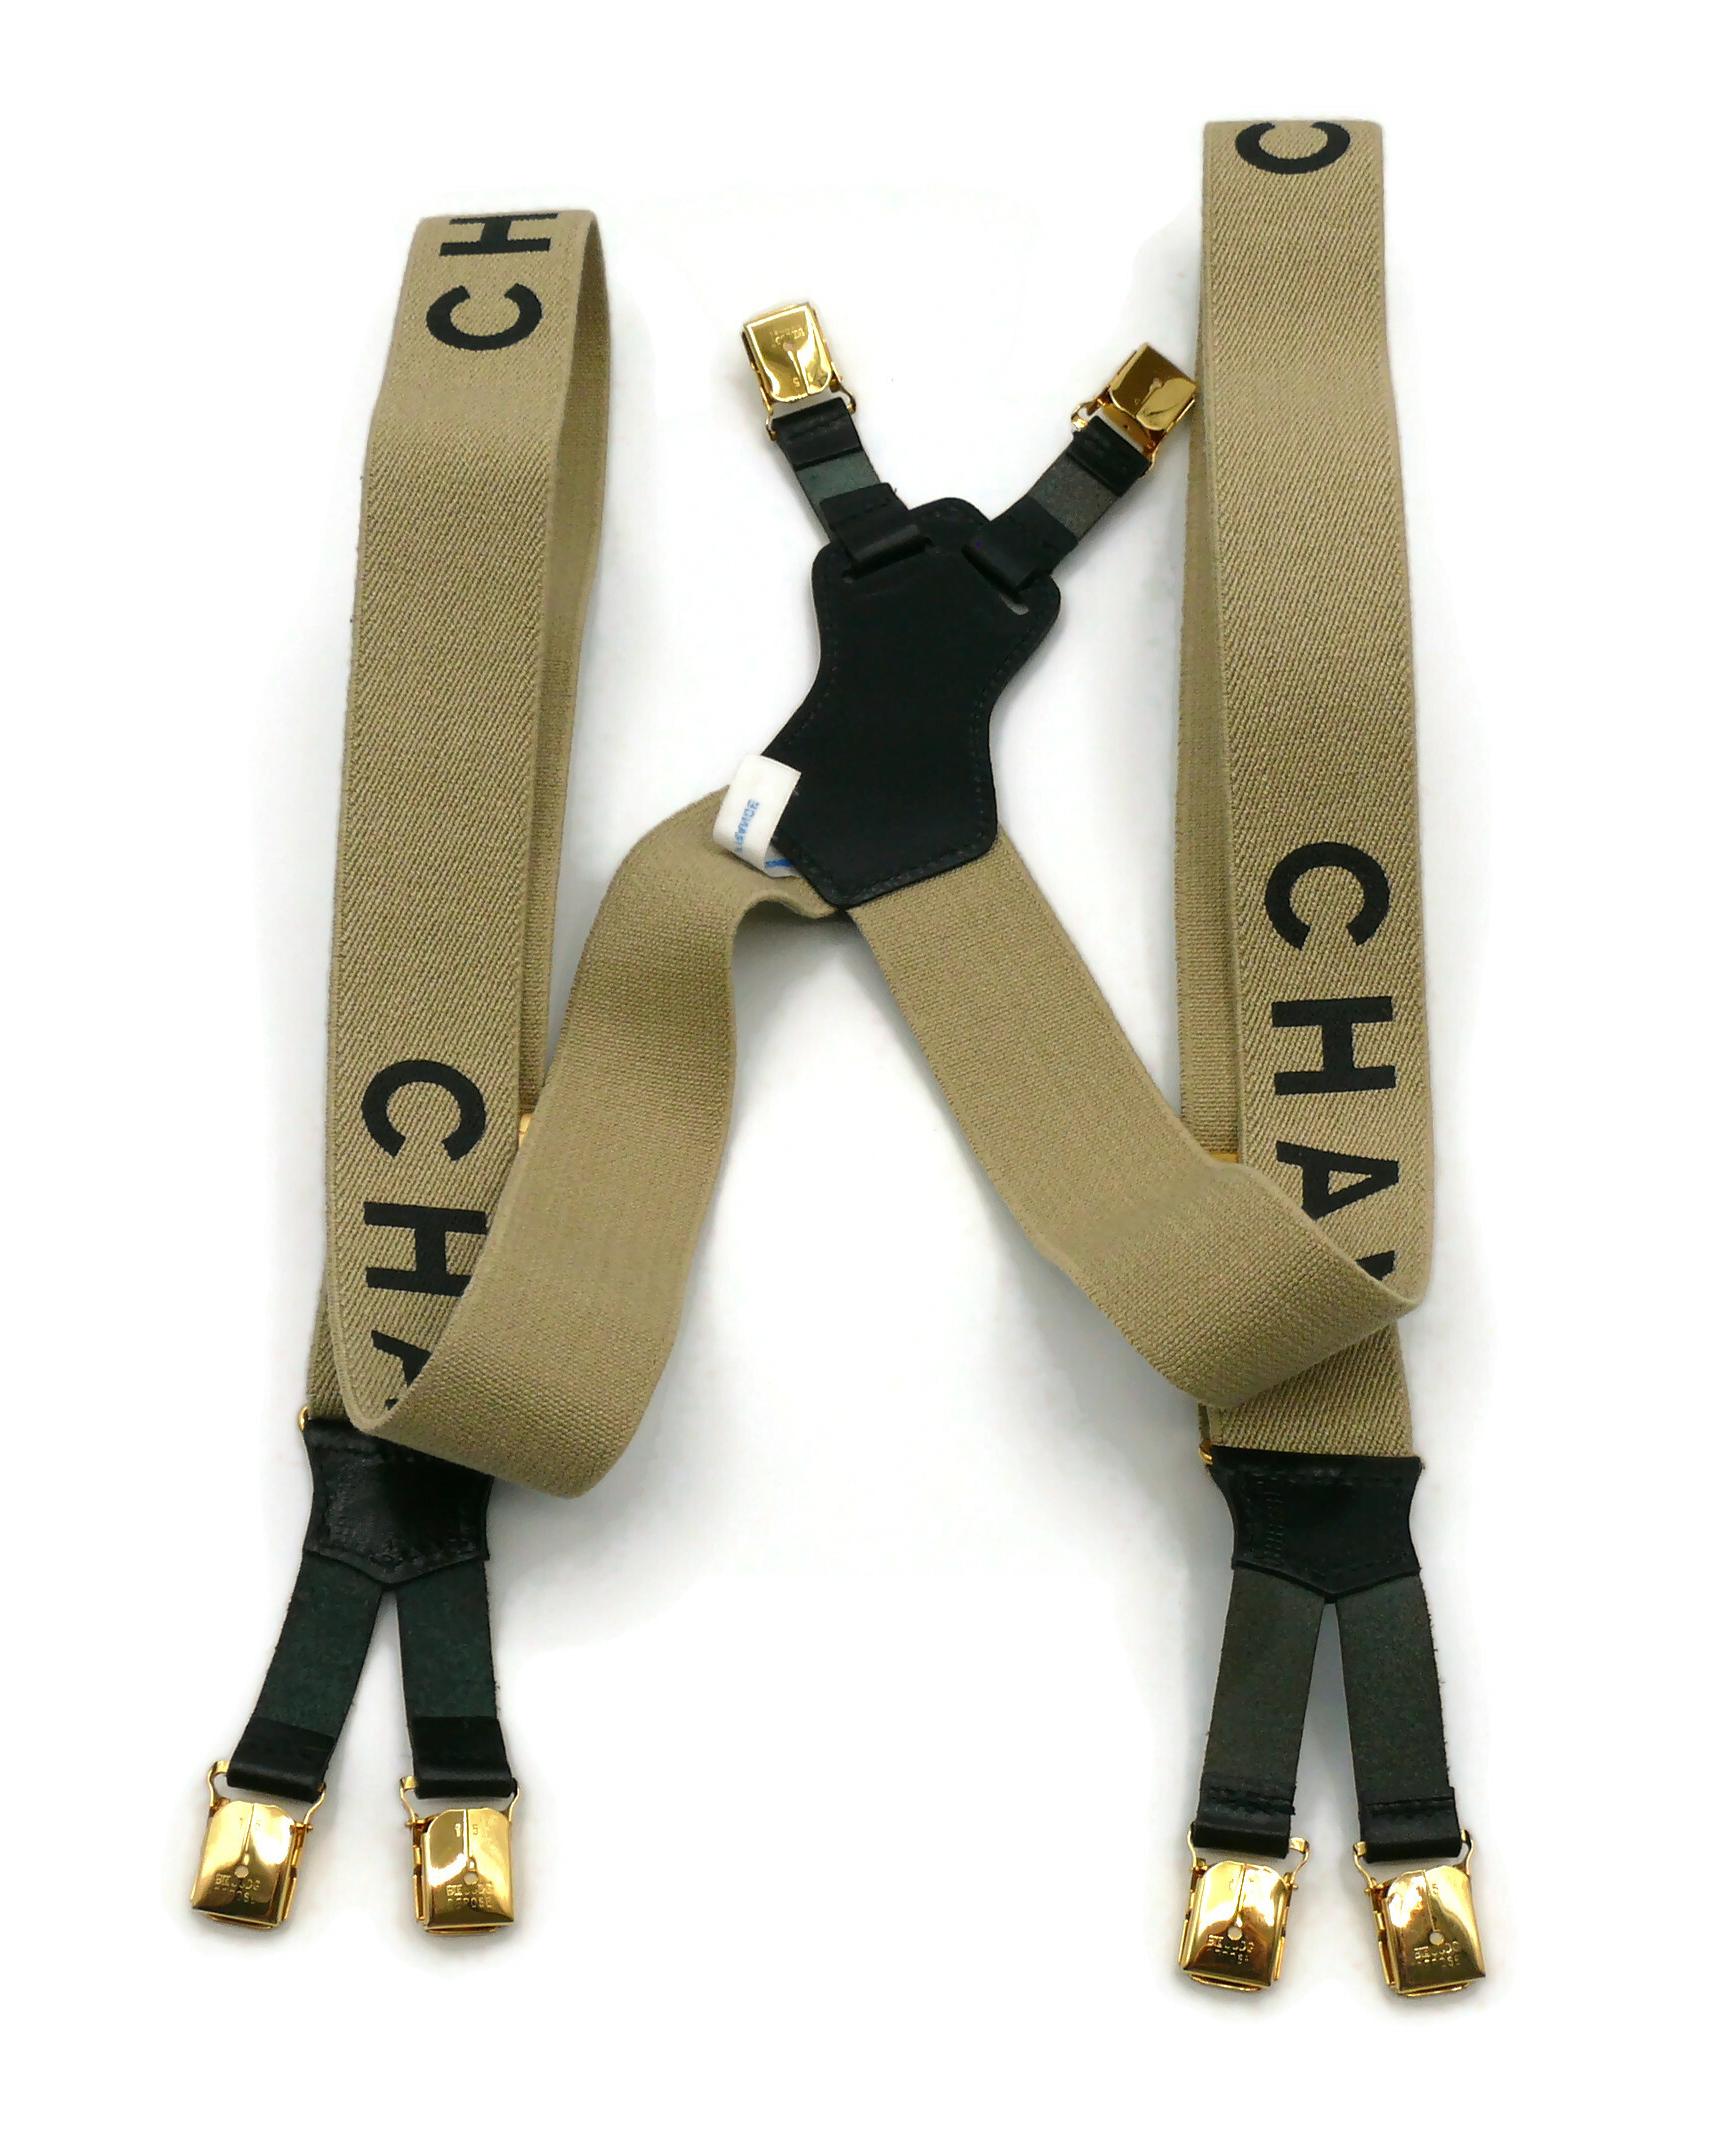 CHANEL by KARL LAGERFELD Vintage Iconic Light Brown and Black Suspenders, 1994 im Angebot 8